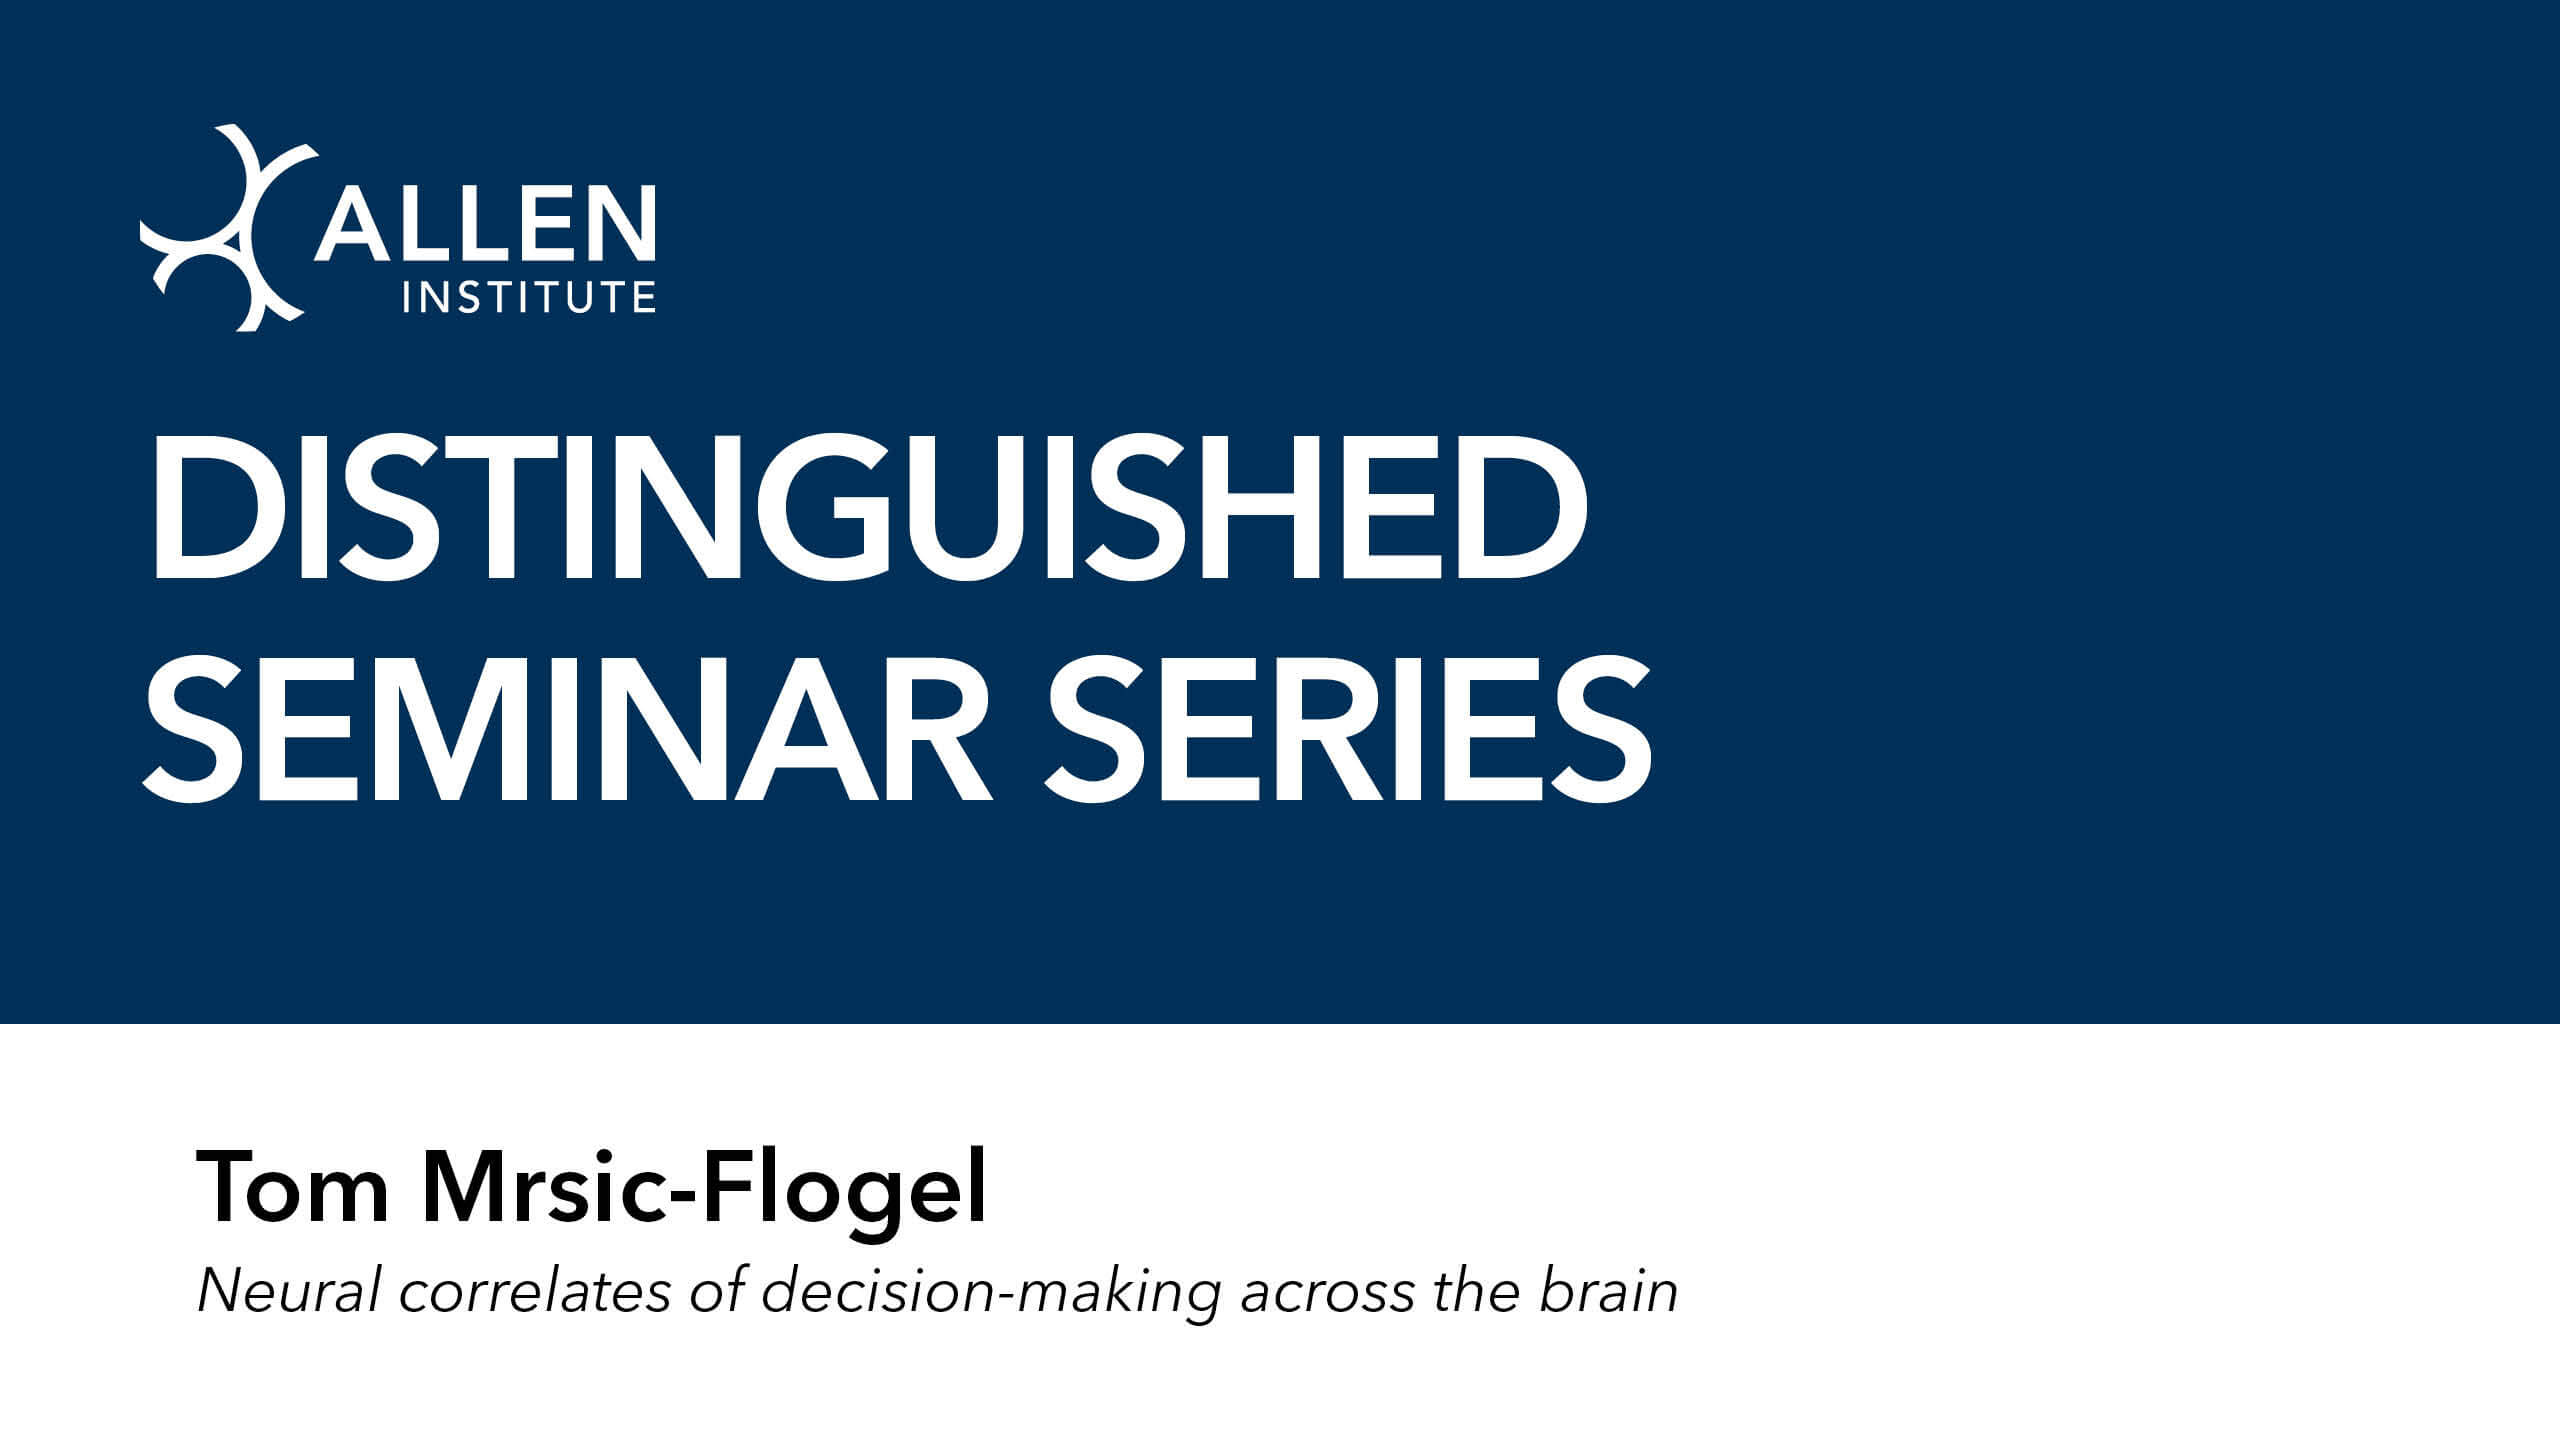 Tile card that includes the title "Distinguished Seminar Series" and a subtitle of "Tom Mrsic-Flogel" with the title of the talk listed as "Neural correlates of decision-making across the brain"